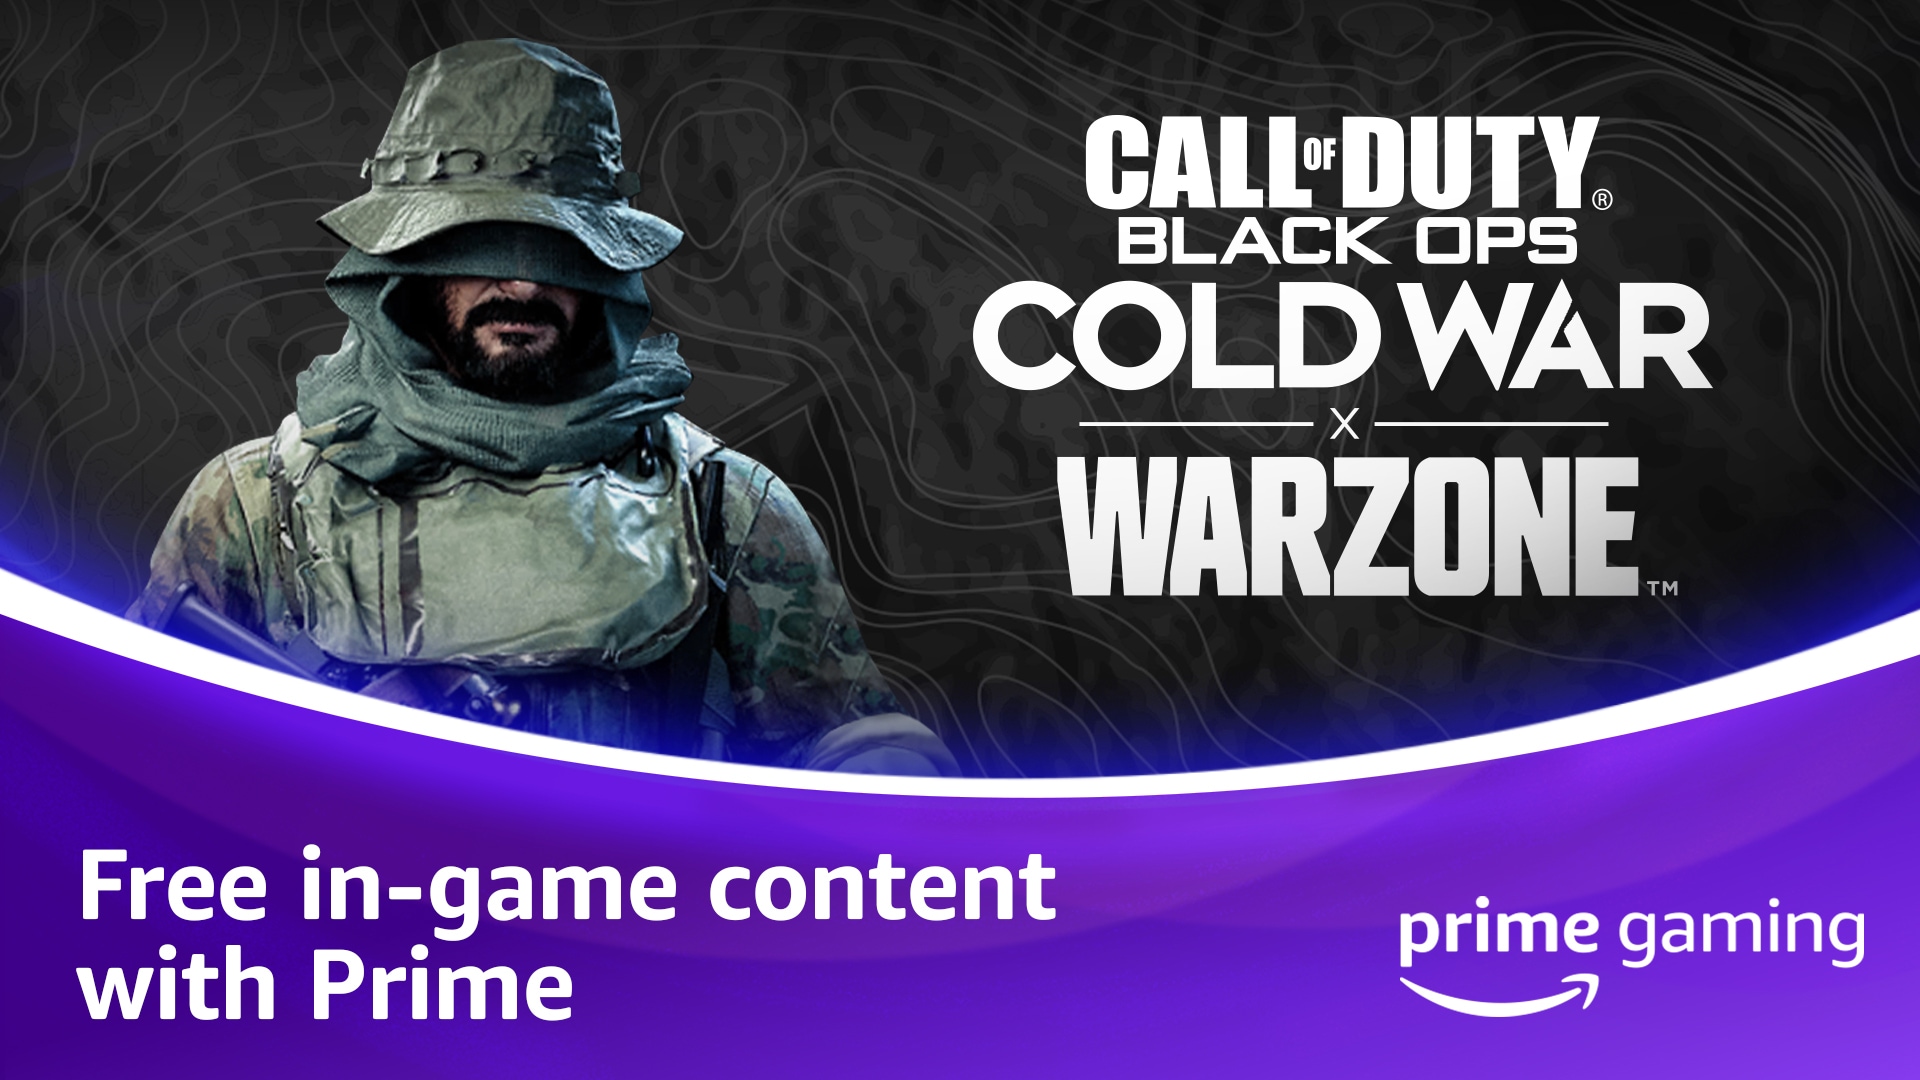 Introducing Call of Duty®: Black Ops Cold War, Warzone™, and Mobile Prime Gaming rewards for Prime members